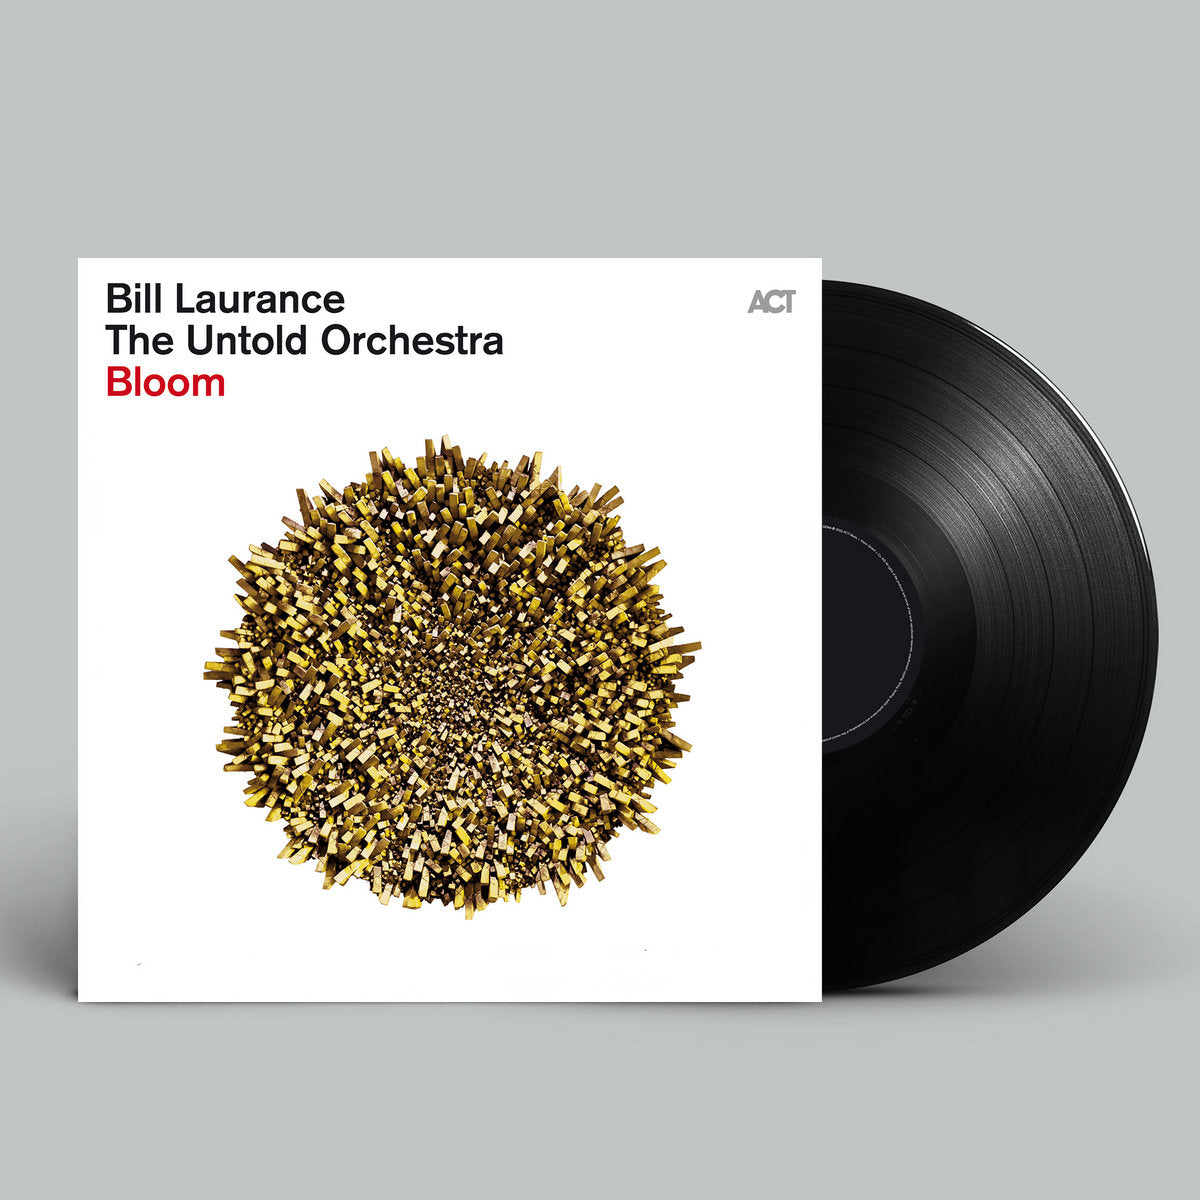 Bill Laurance & The Untold Orchestra - Bloom